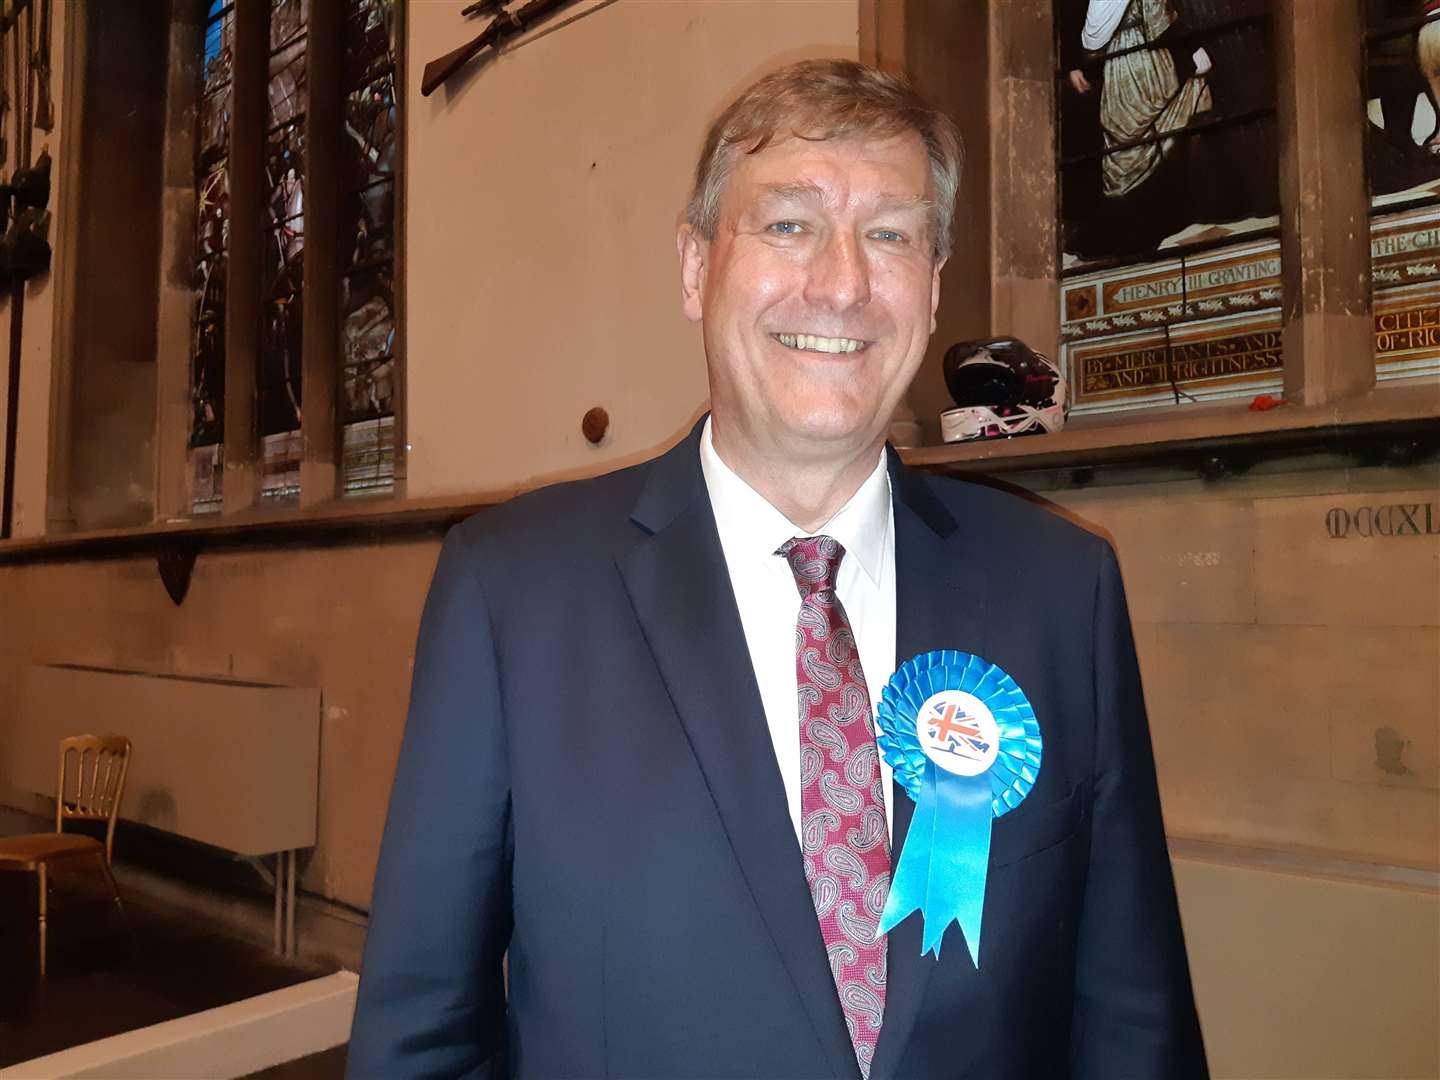 DDC leader Keith Morris won a seat in the Guston, Kingsdown and St Margaret's ward